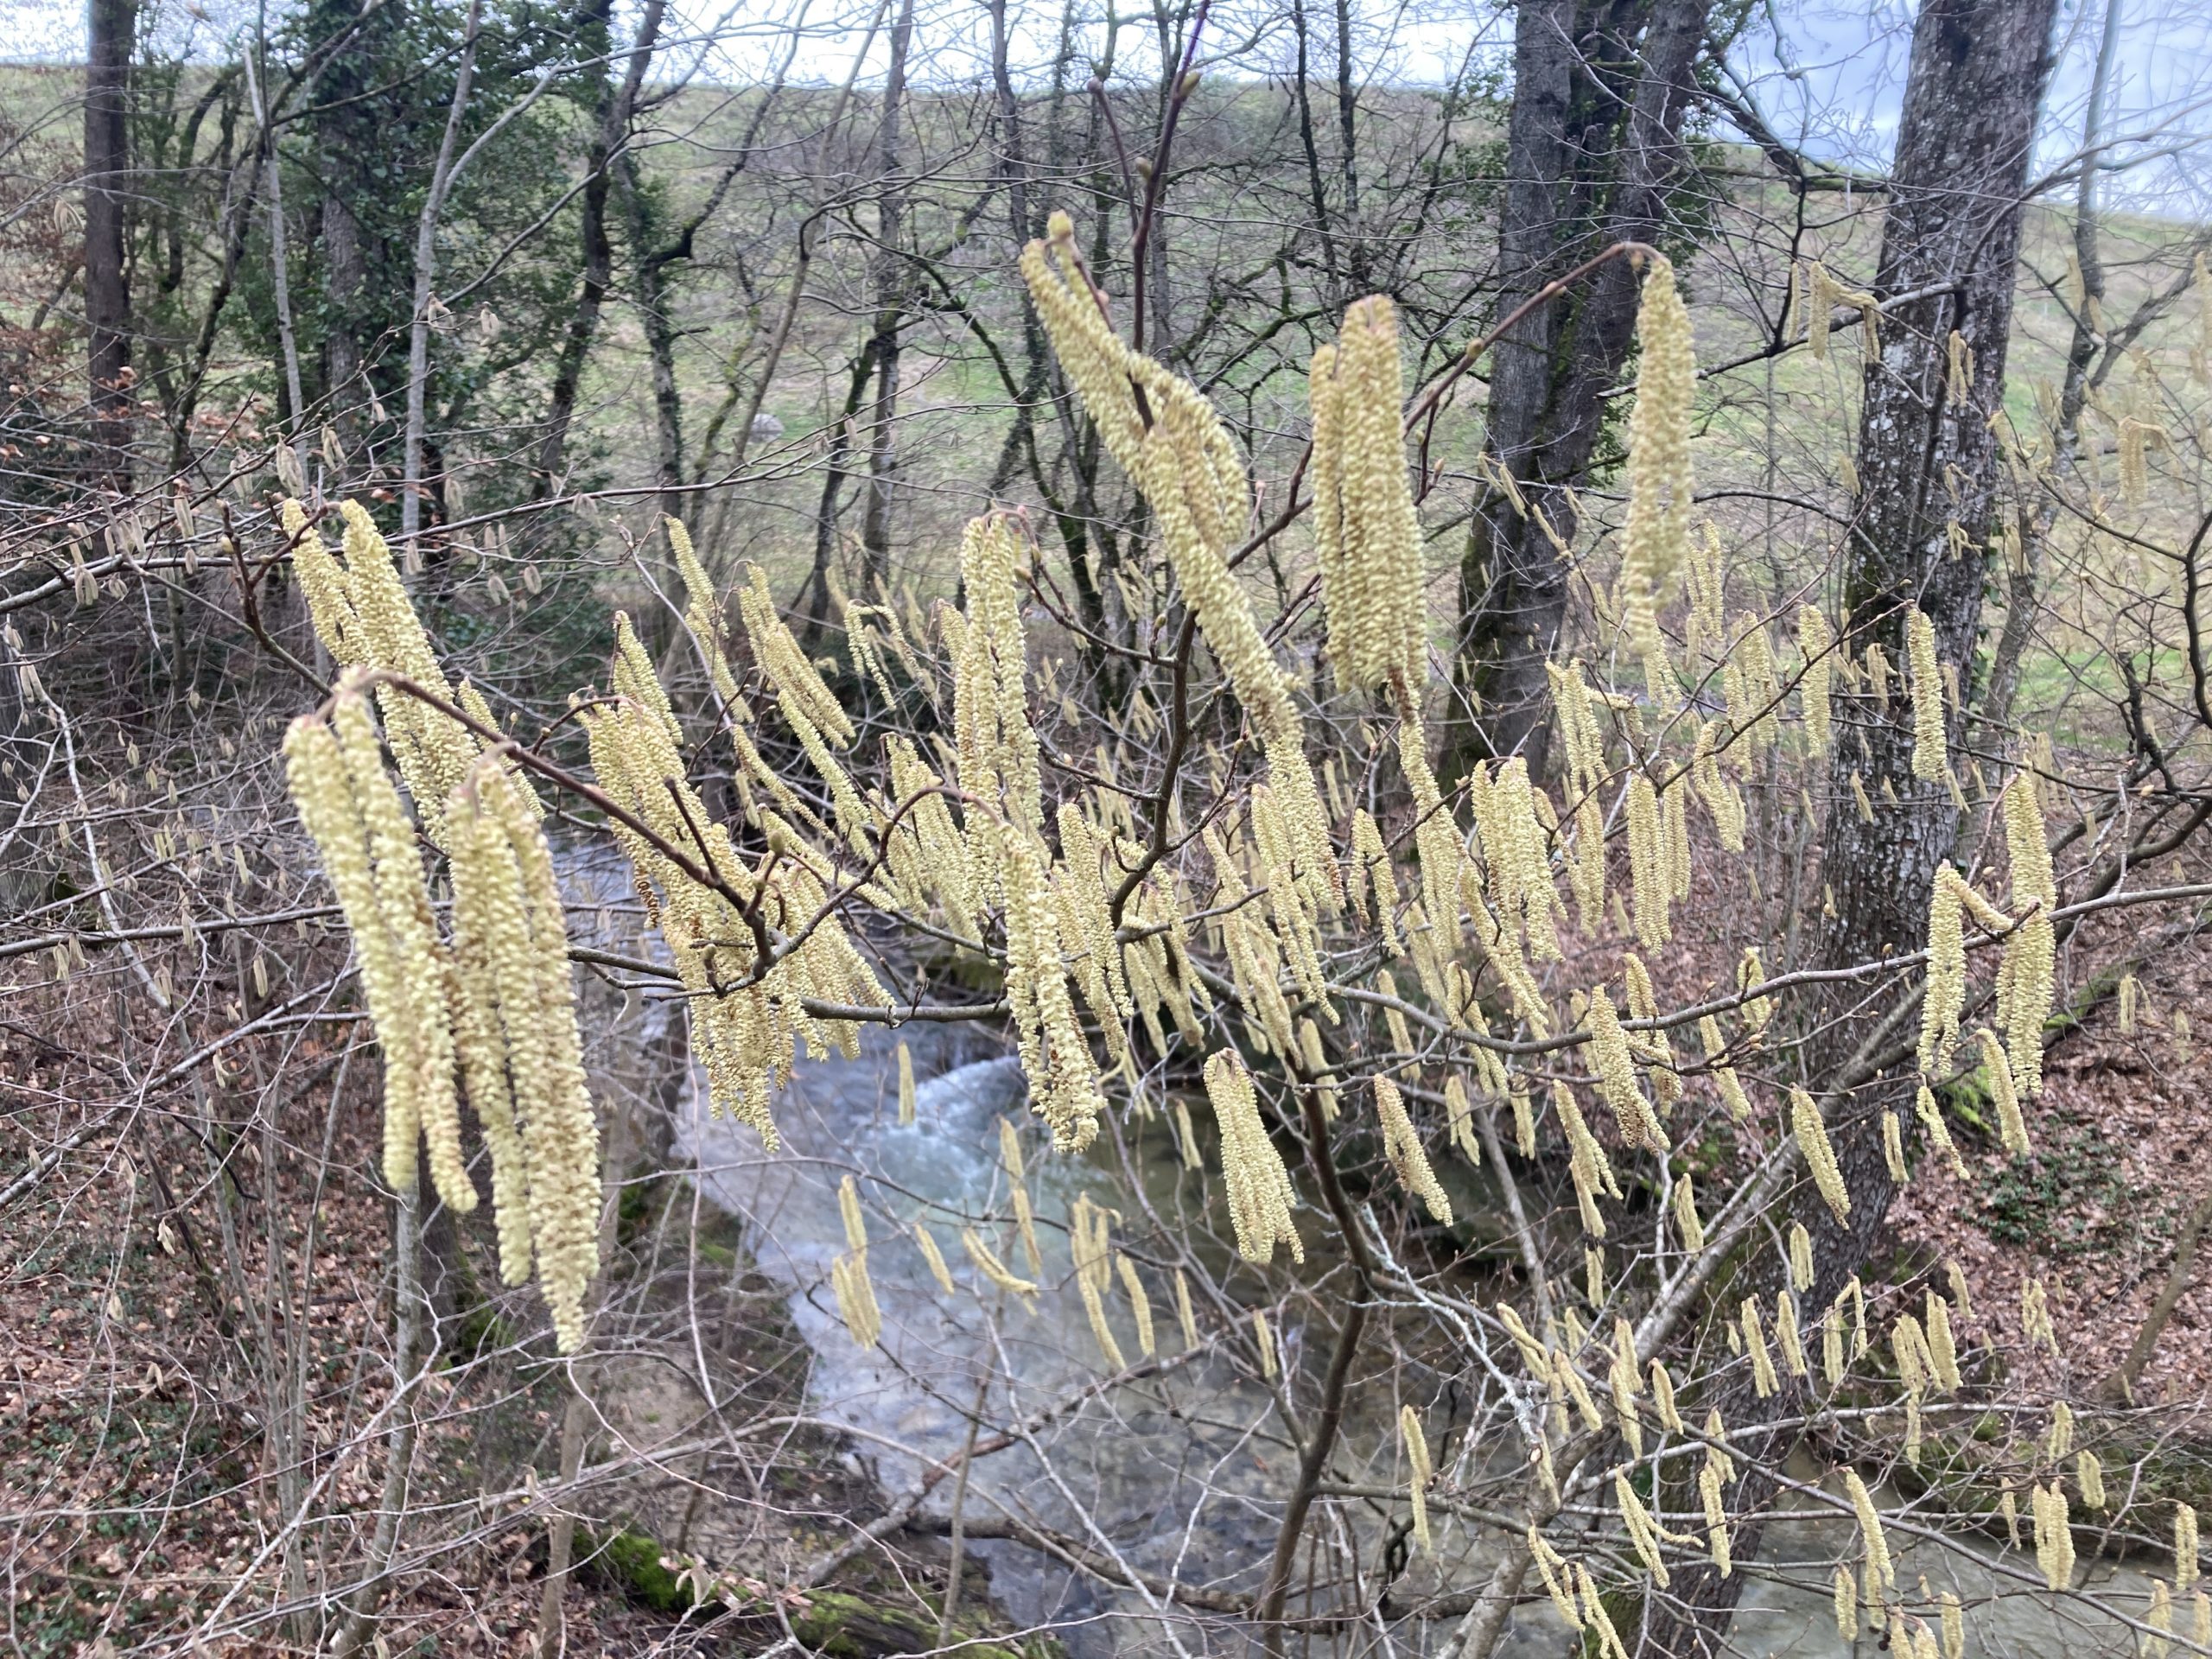 Catkins in January